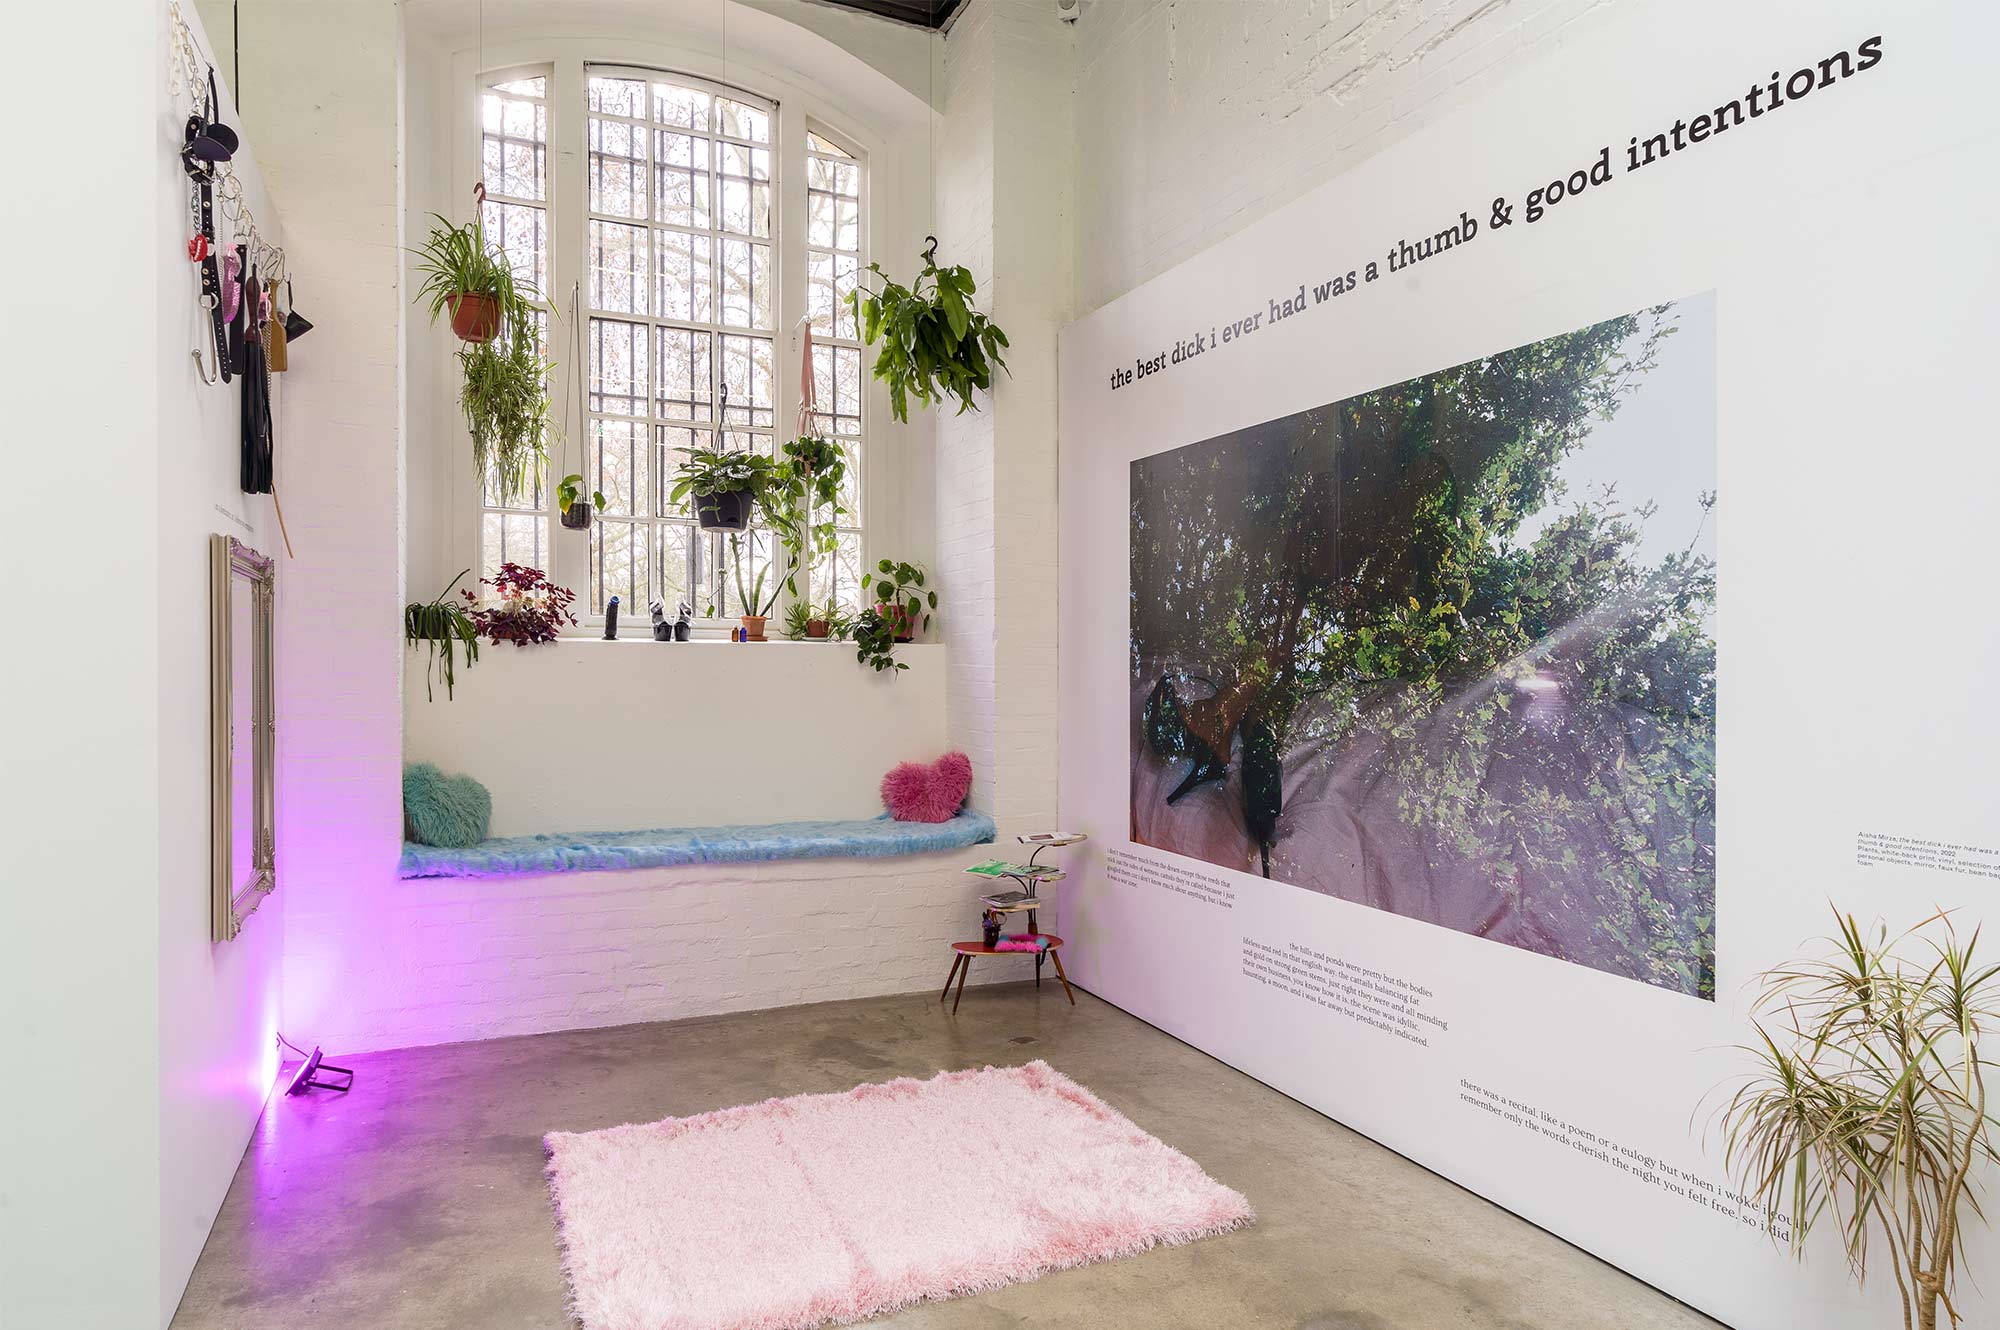 Gallery space filled with hanging pot plants and lush pink carpet